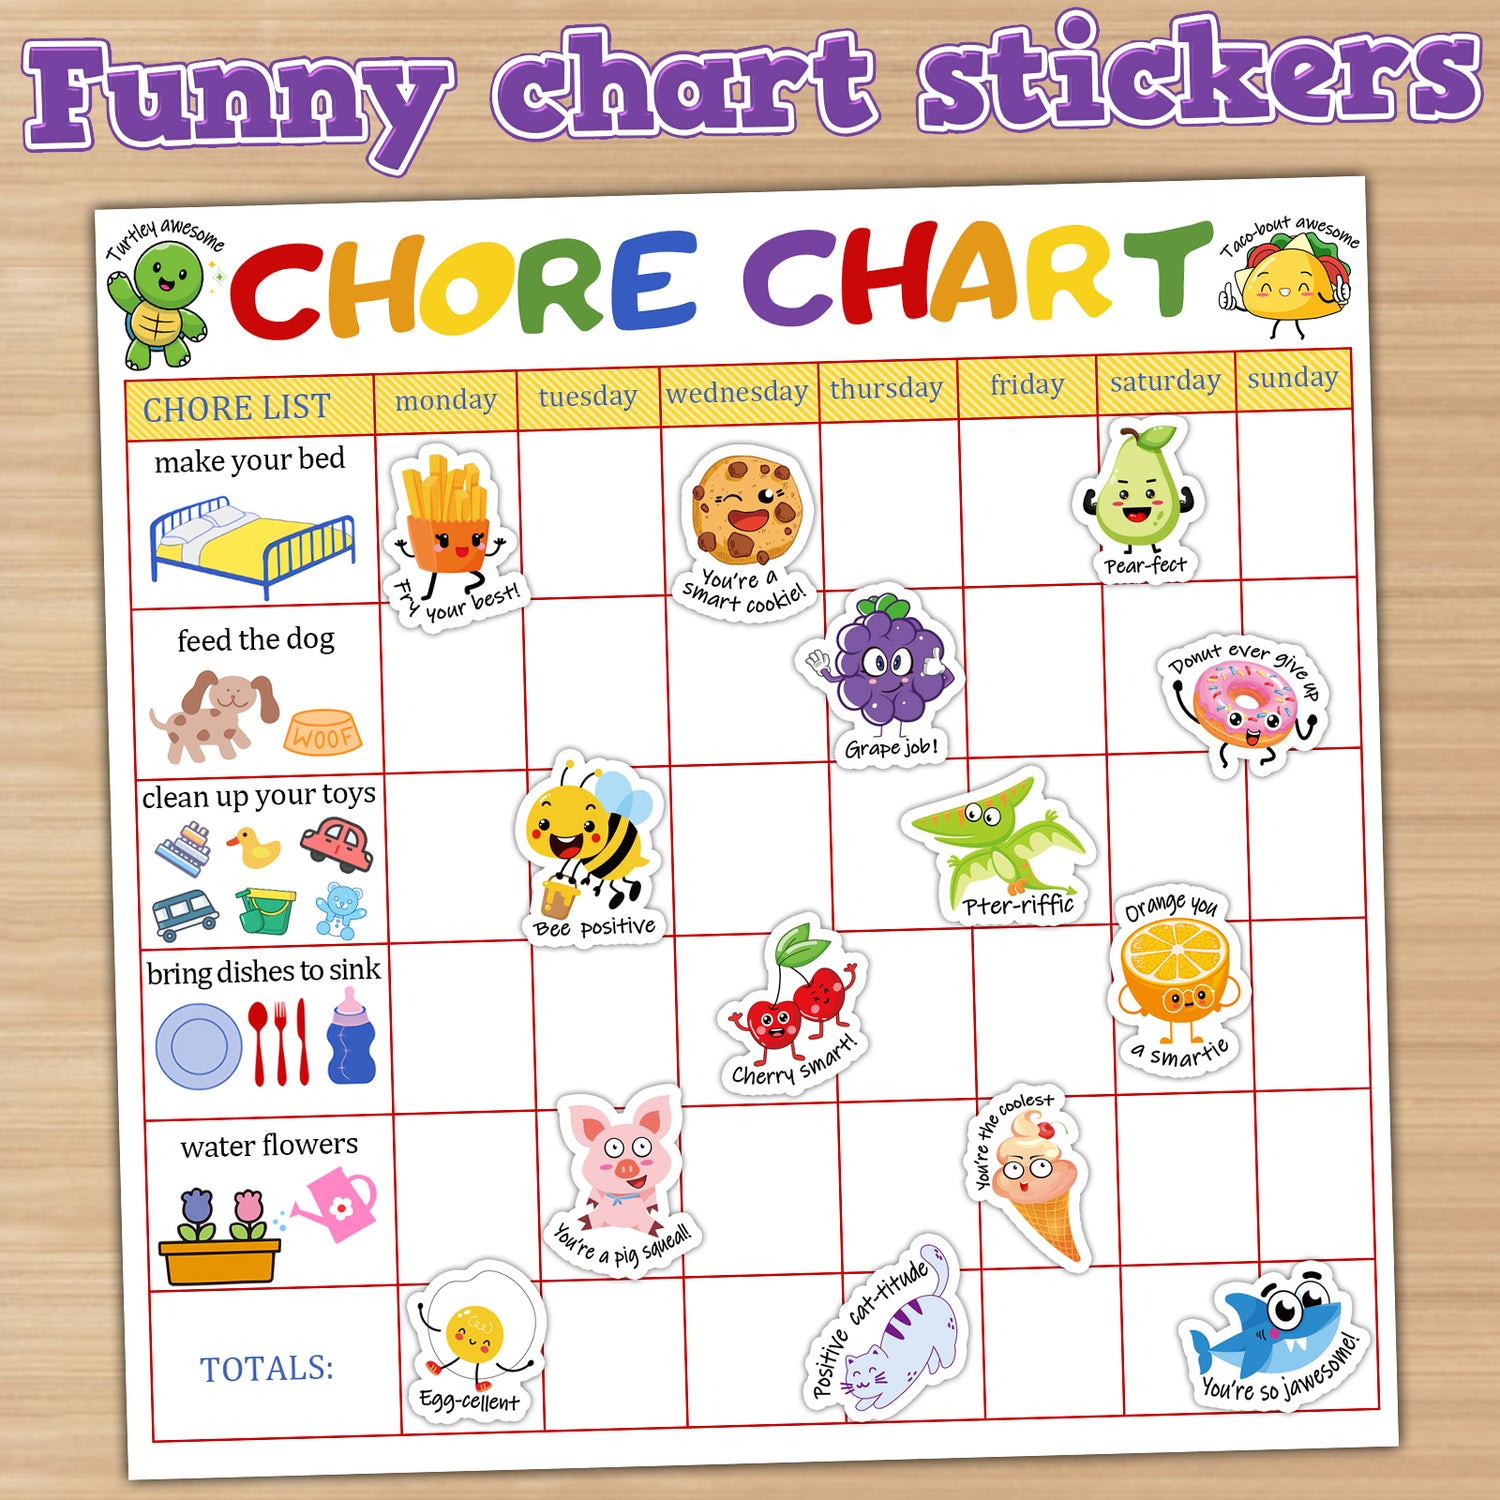 Reward Stickers for Kids,600PCS Motivational Stickers for Teachers Stickers  Packs,Cute Animal Reward Stickers for Students Award School Incentive  Stickers Teacher Supplies for Classroom